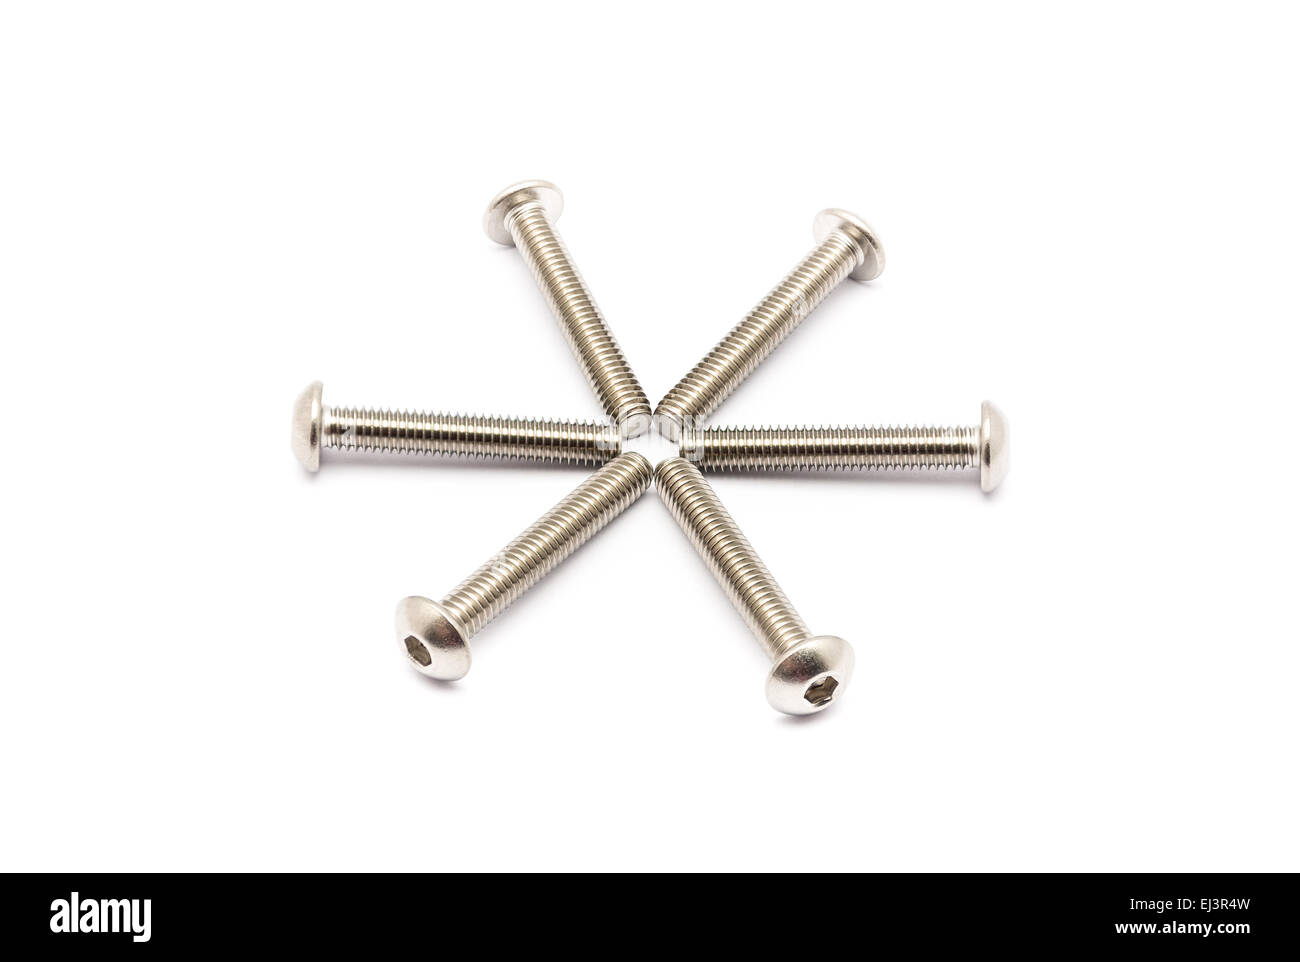 Round Pile of Ball-Hex-Head Stainless Steel Bolts. Stock Photo